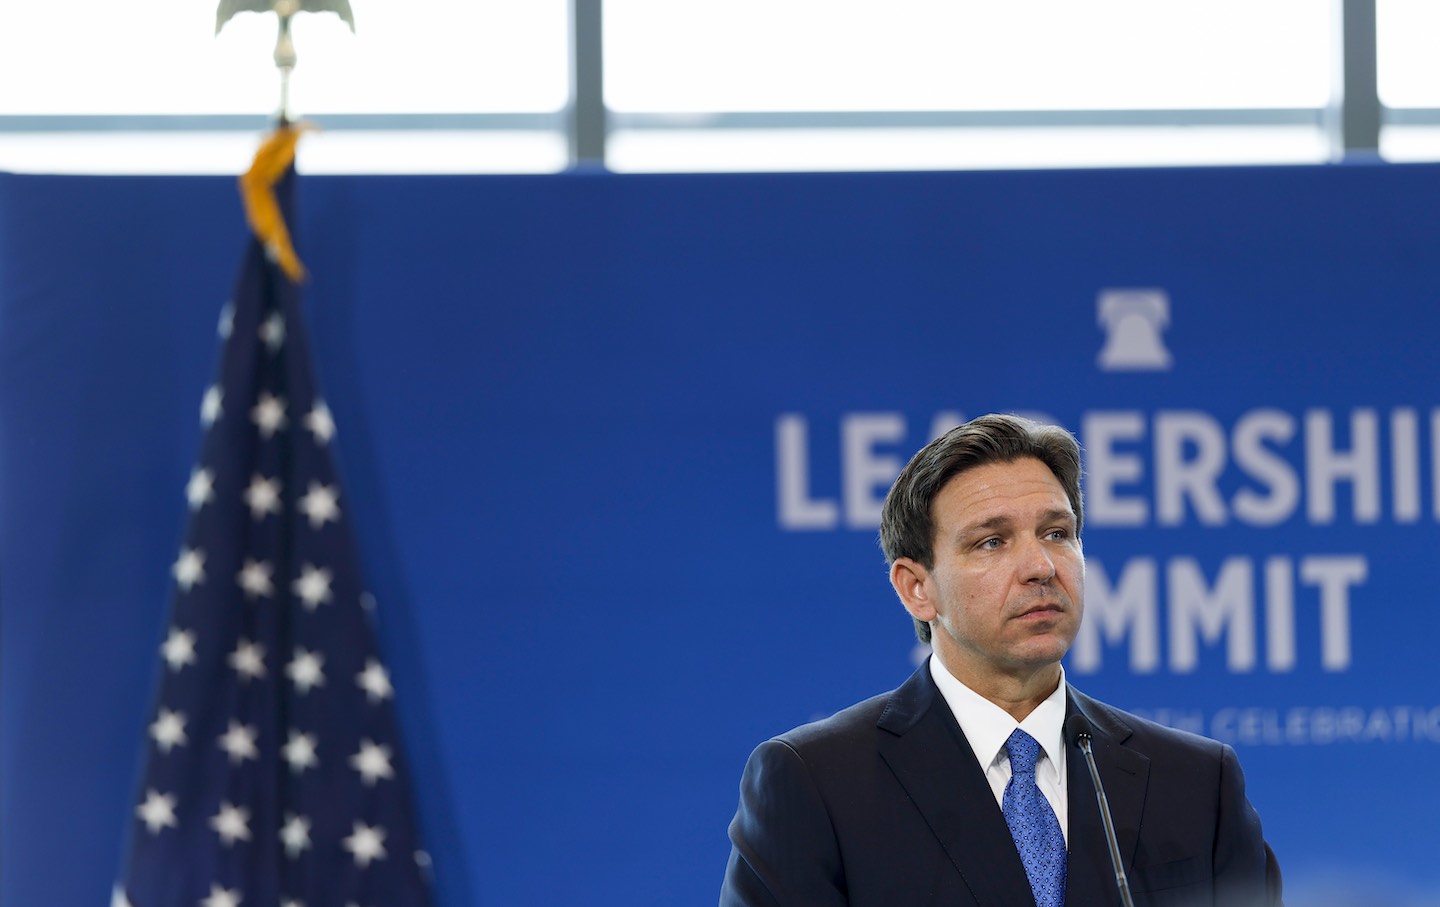 Florida Governor Ron DeSantis gives remarks at the Heritage Foundation's 50th Anniversary Leadership Summit at the Gaylord National Resort & Convention Center on April 21, 2023, in National Harbor, Md.